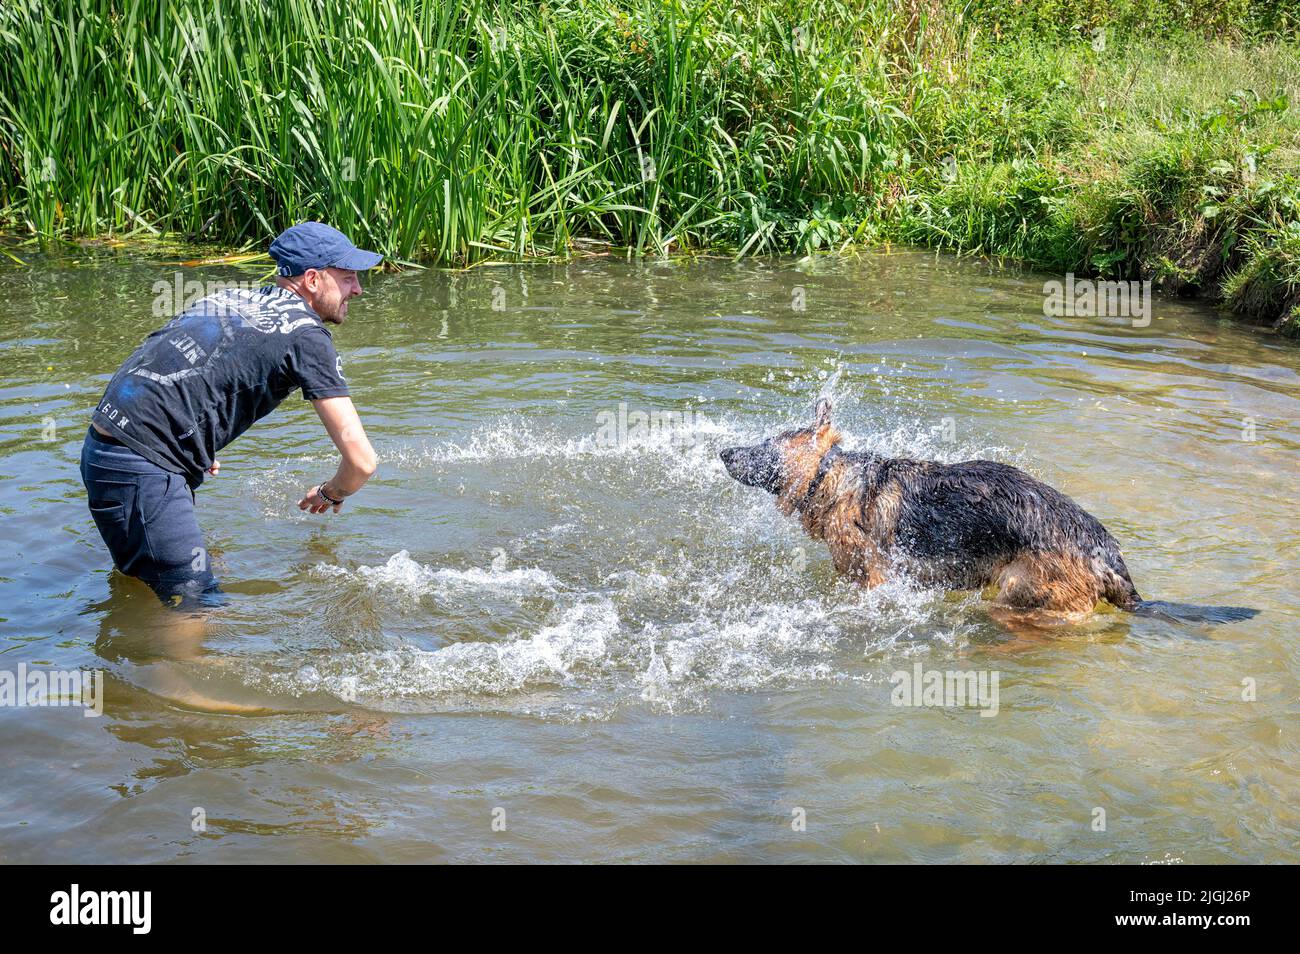 Overcote, Over, Cambridgeshire UK, 11th July 2022. Peter and his German Shepherd dog Mia cool down in the River Great Ouse in the UK heatwave. Amber warnings for high temperatures have been issued in the east of England today as temperatures are forecast to be above 30 degrees centigrade. The UK weather is expected to be hot and sunny most of the week with the potential to break the record for the hottest day at the weekend. Credit: Julian Eales/Alamy Live News Stock Photo